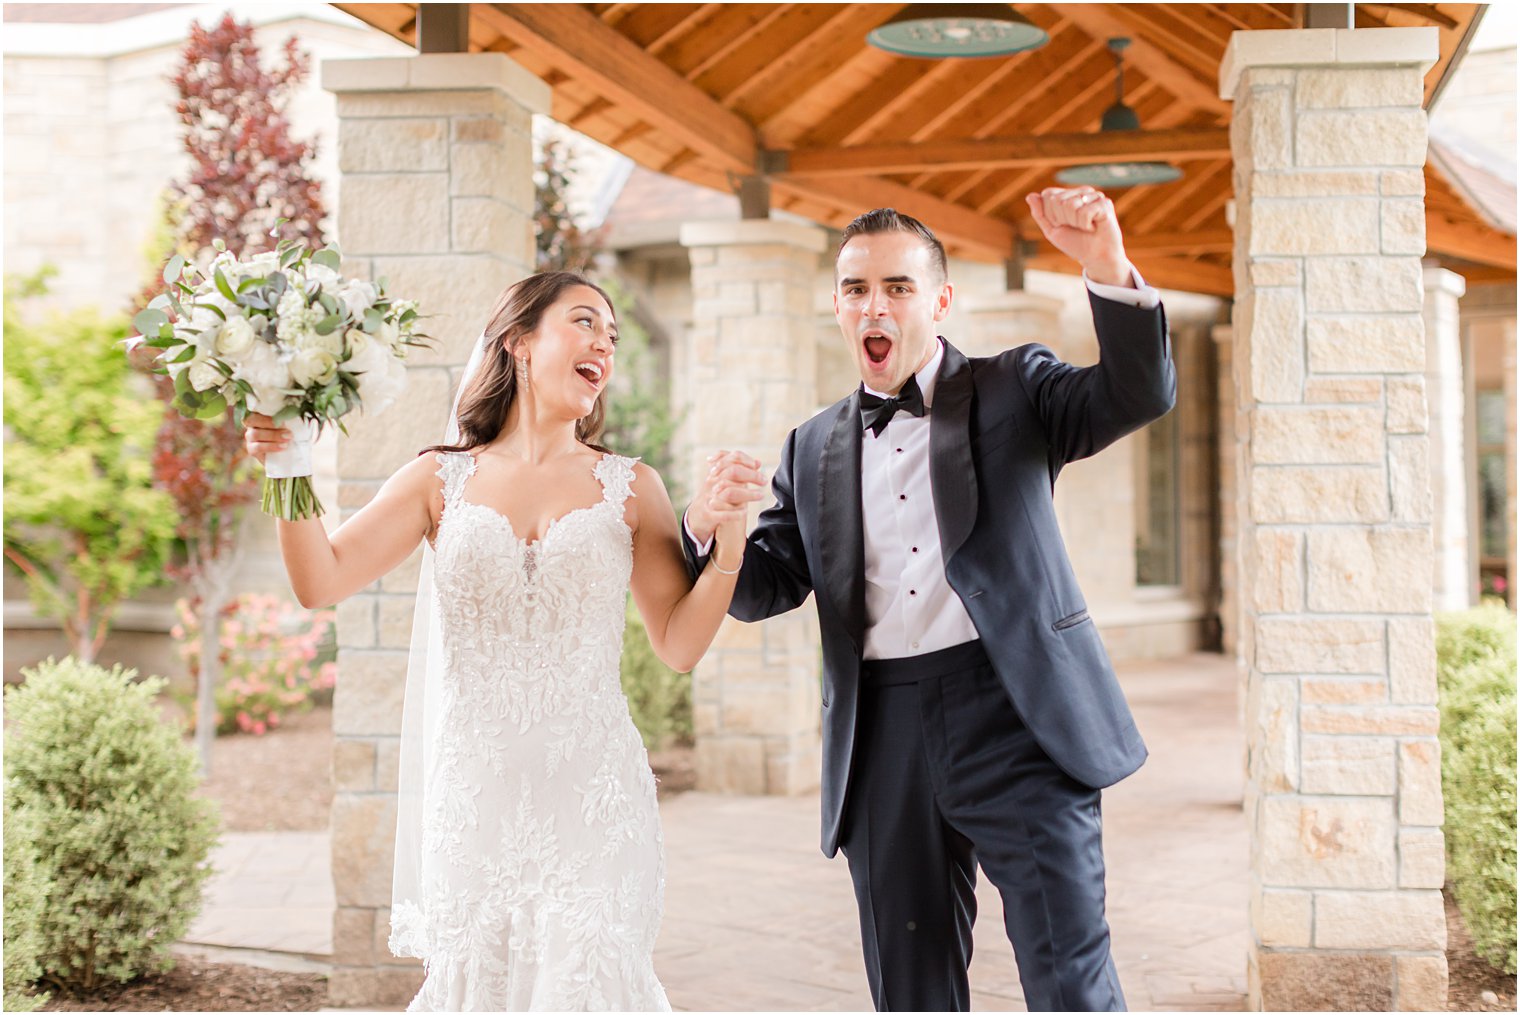 newlyweds cheer after traditional church wedding ceremony in New Jersey